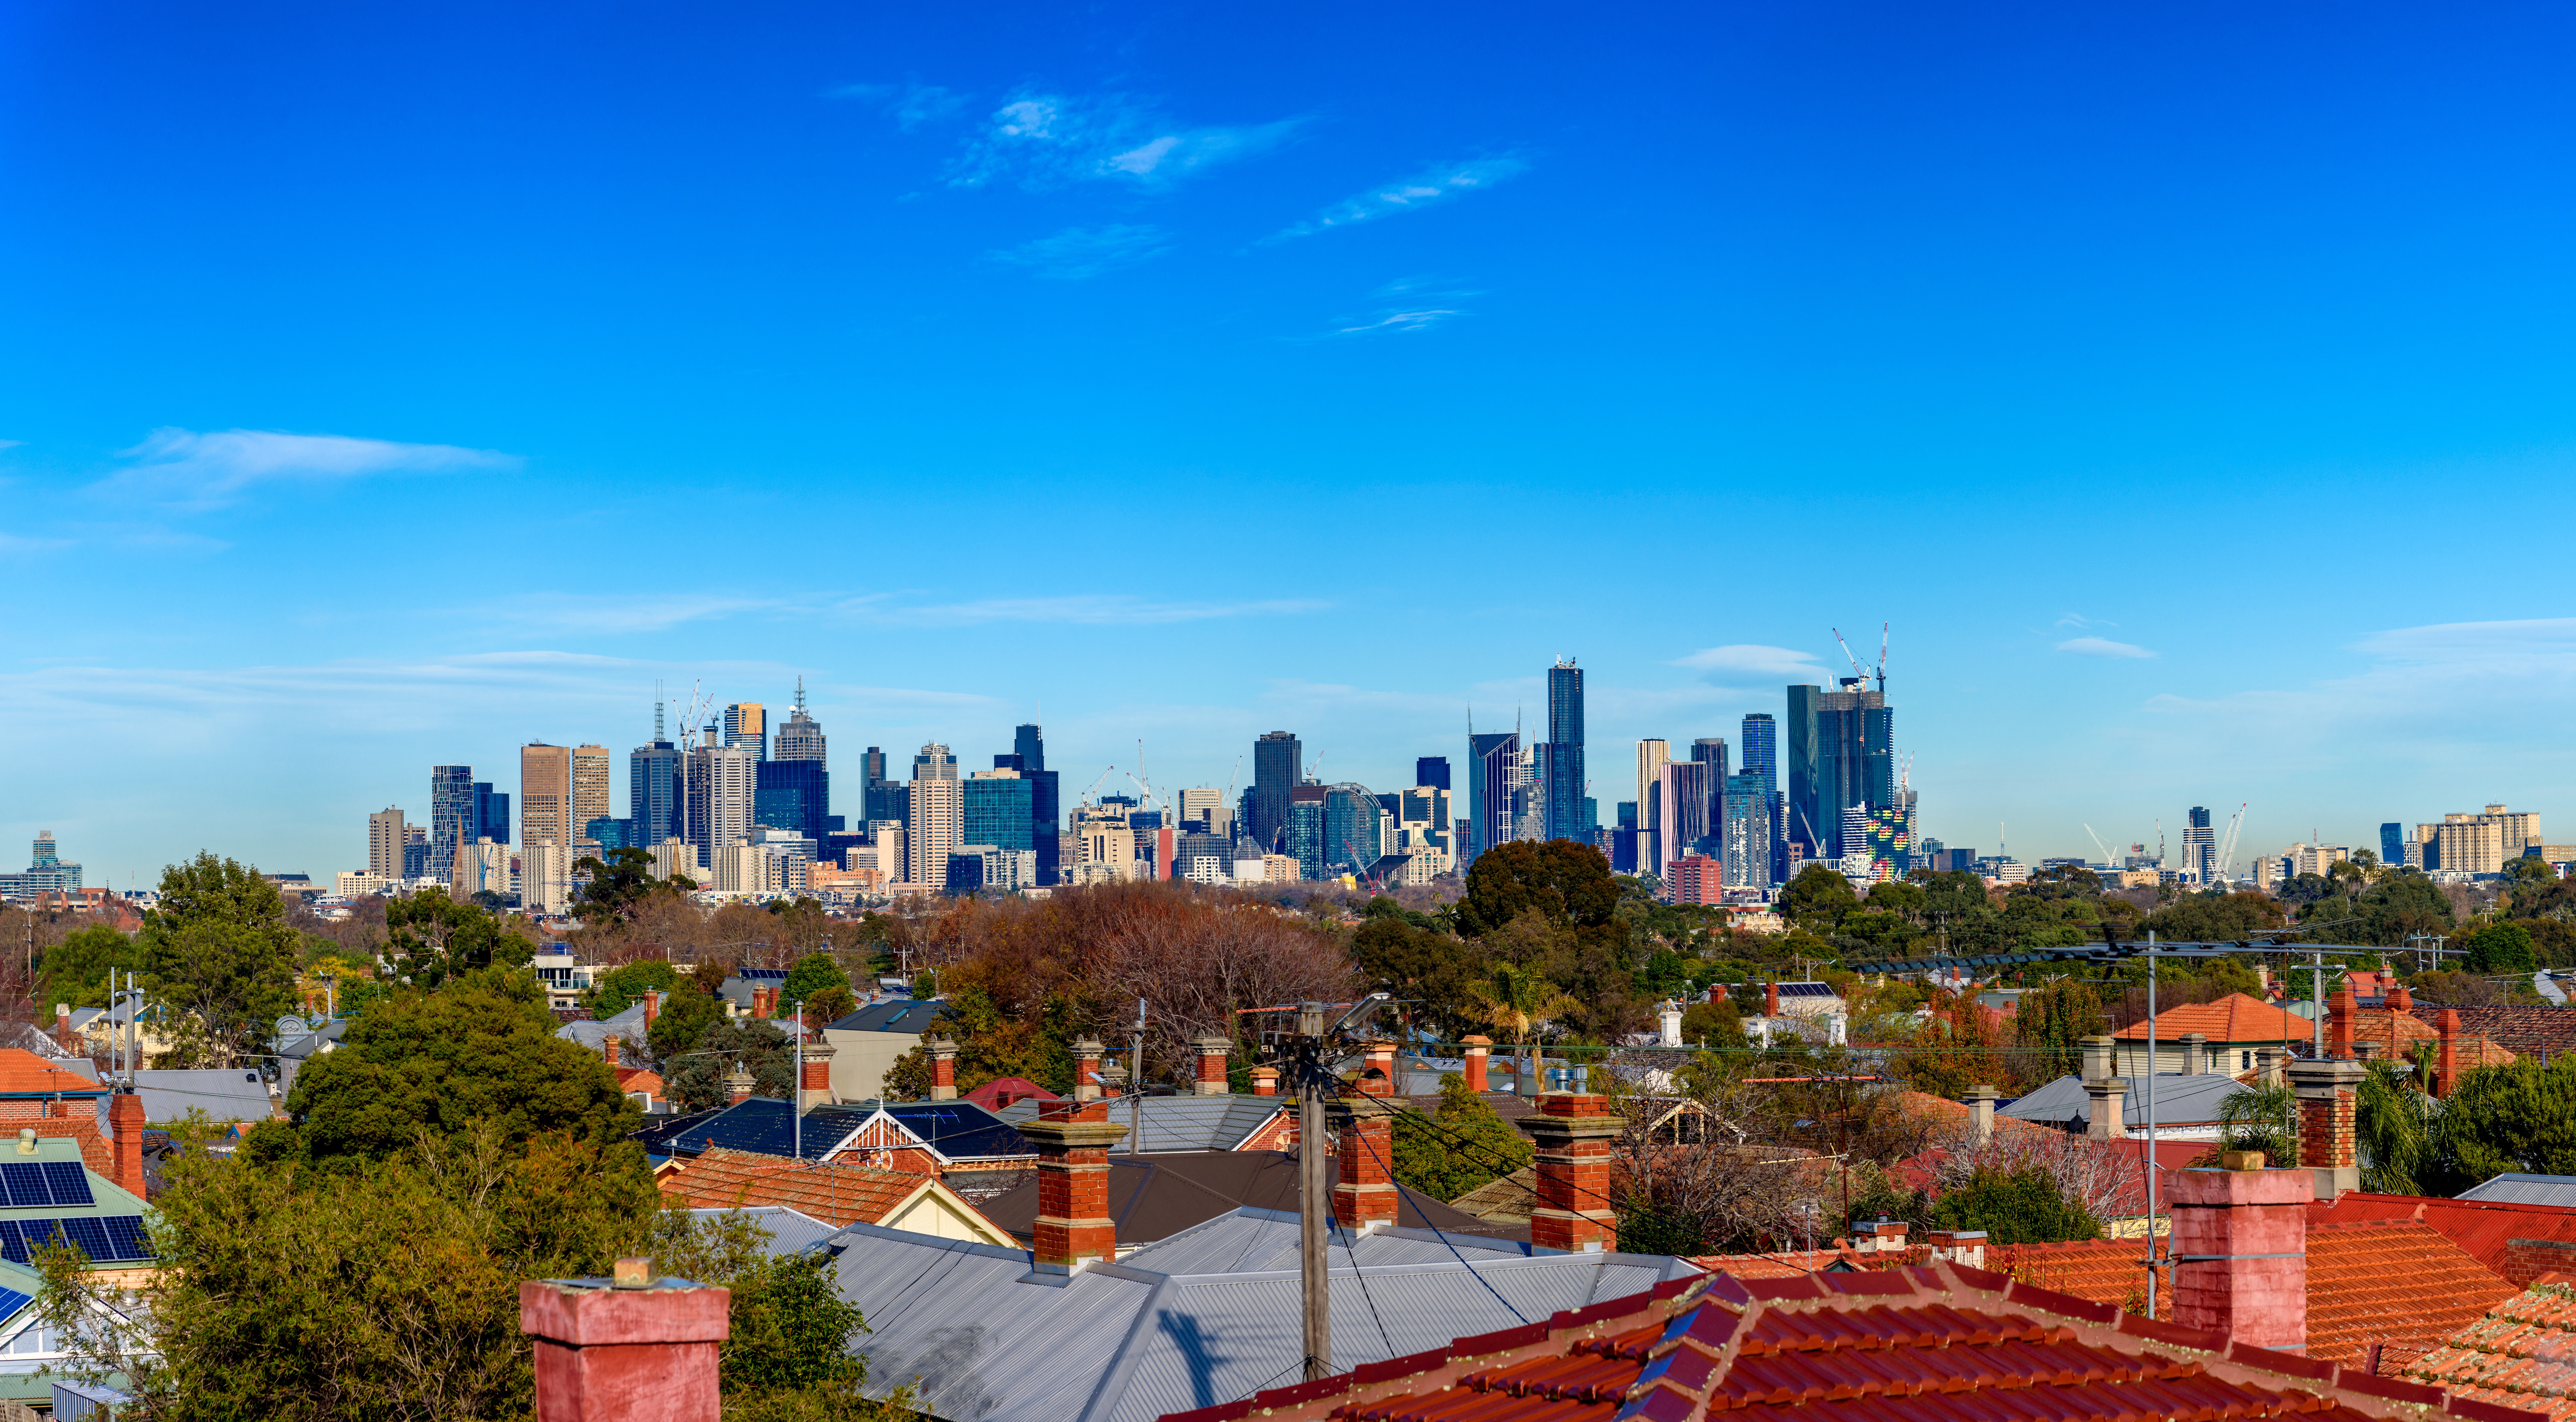 Accommodating Melbourne's Population Growth an Ongoing Balancing Act